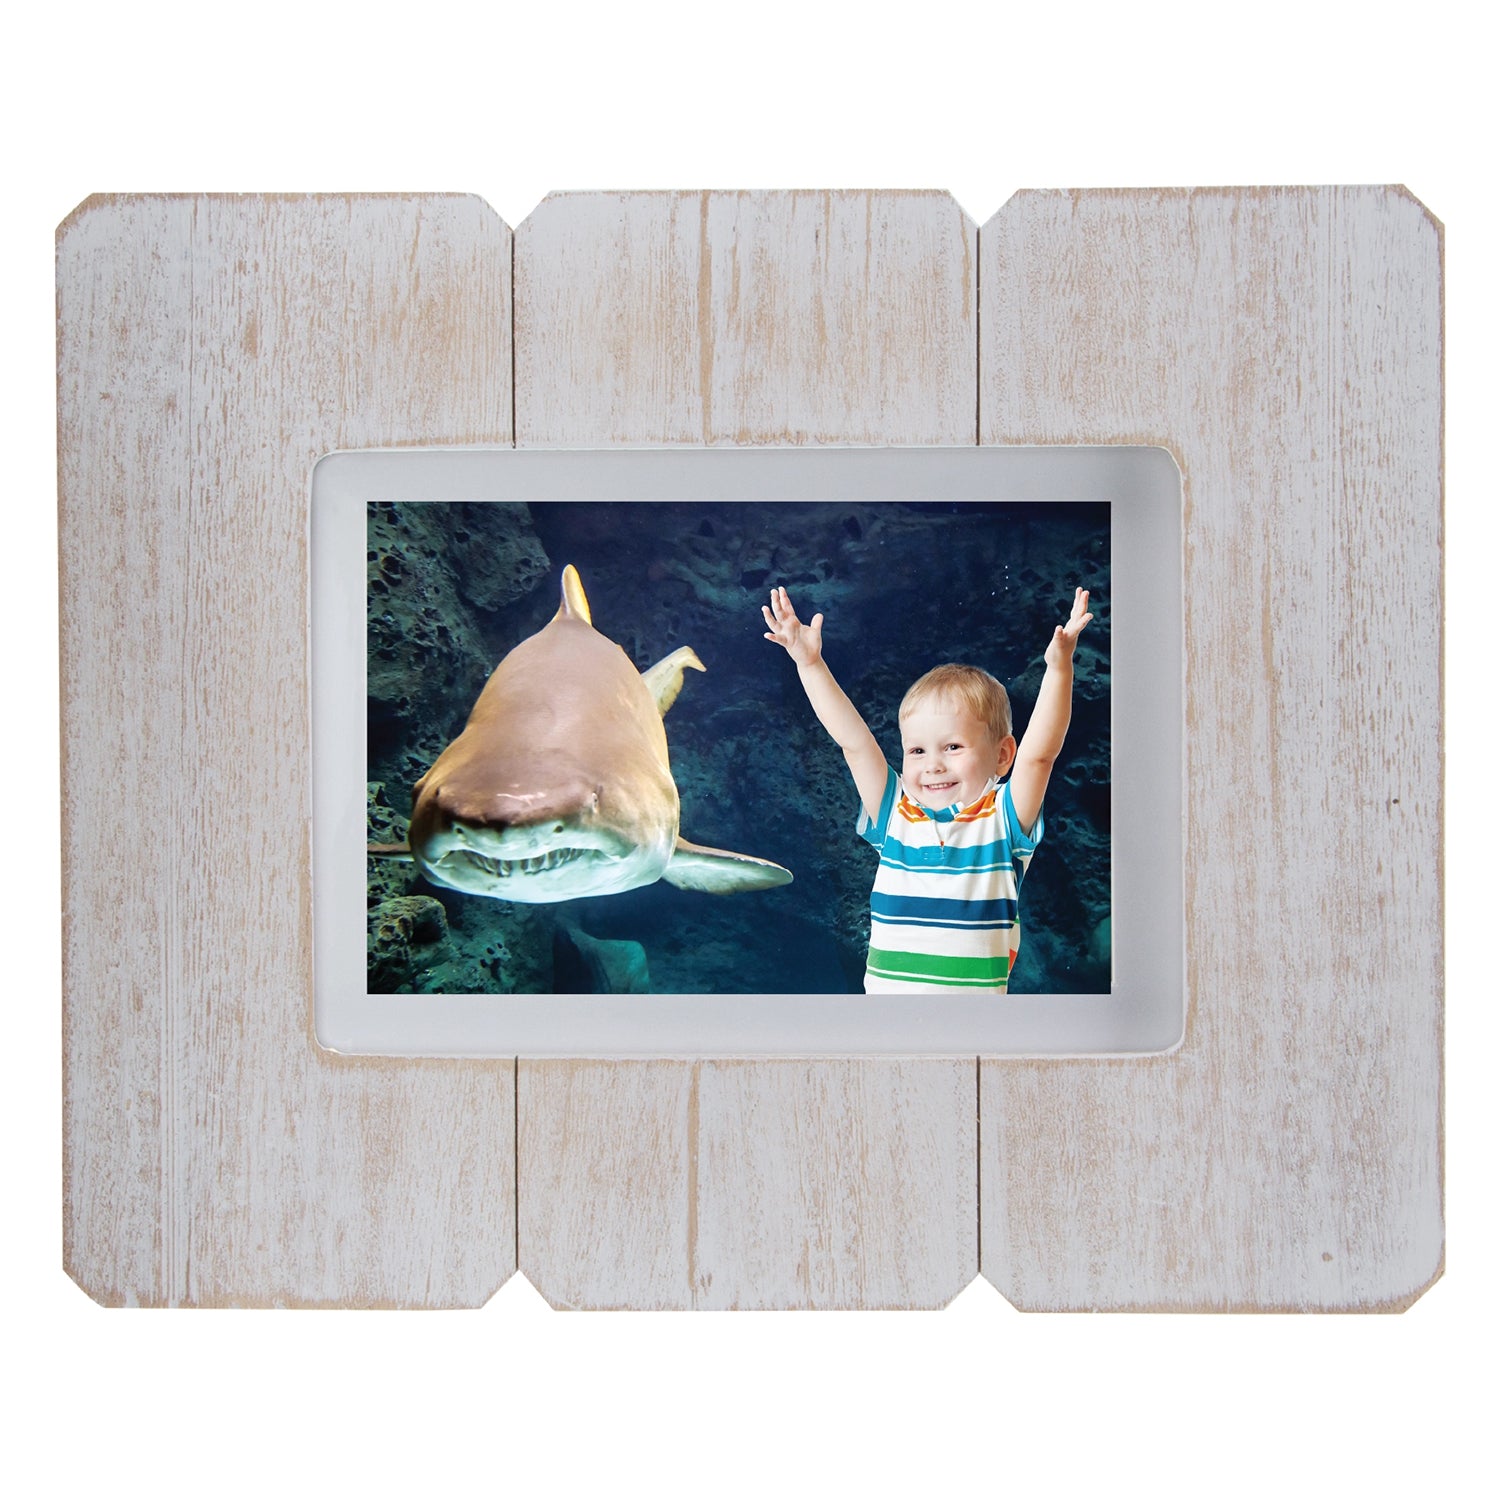 5" x 7" White Distressed Wood Picture Frame